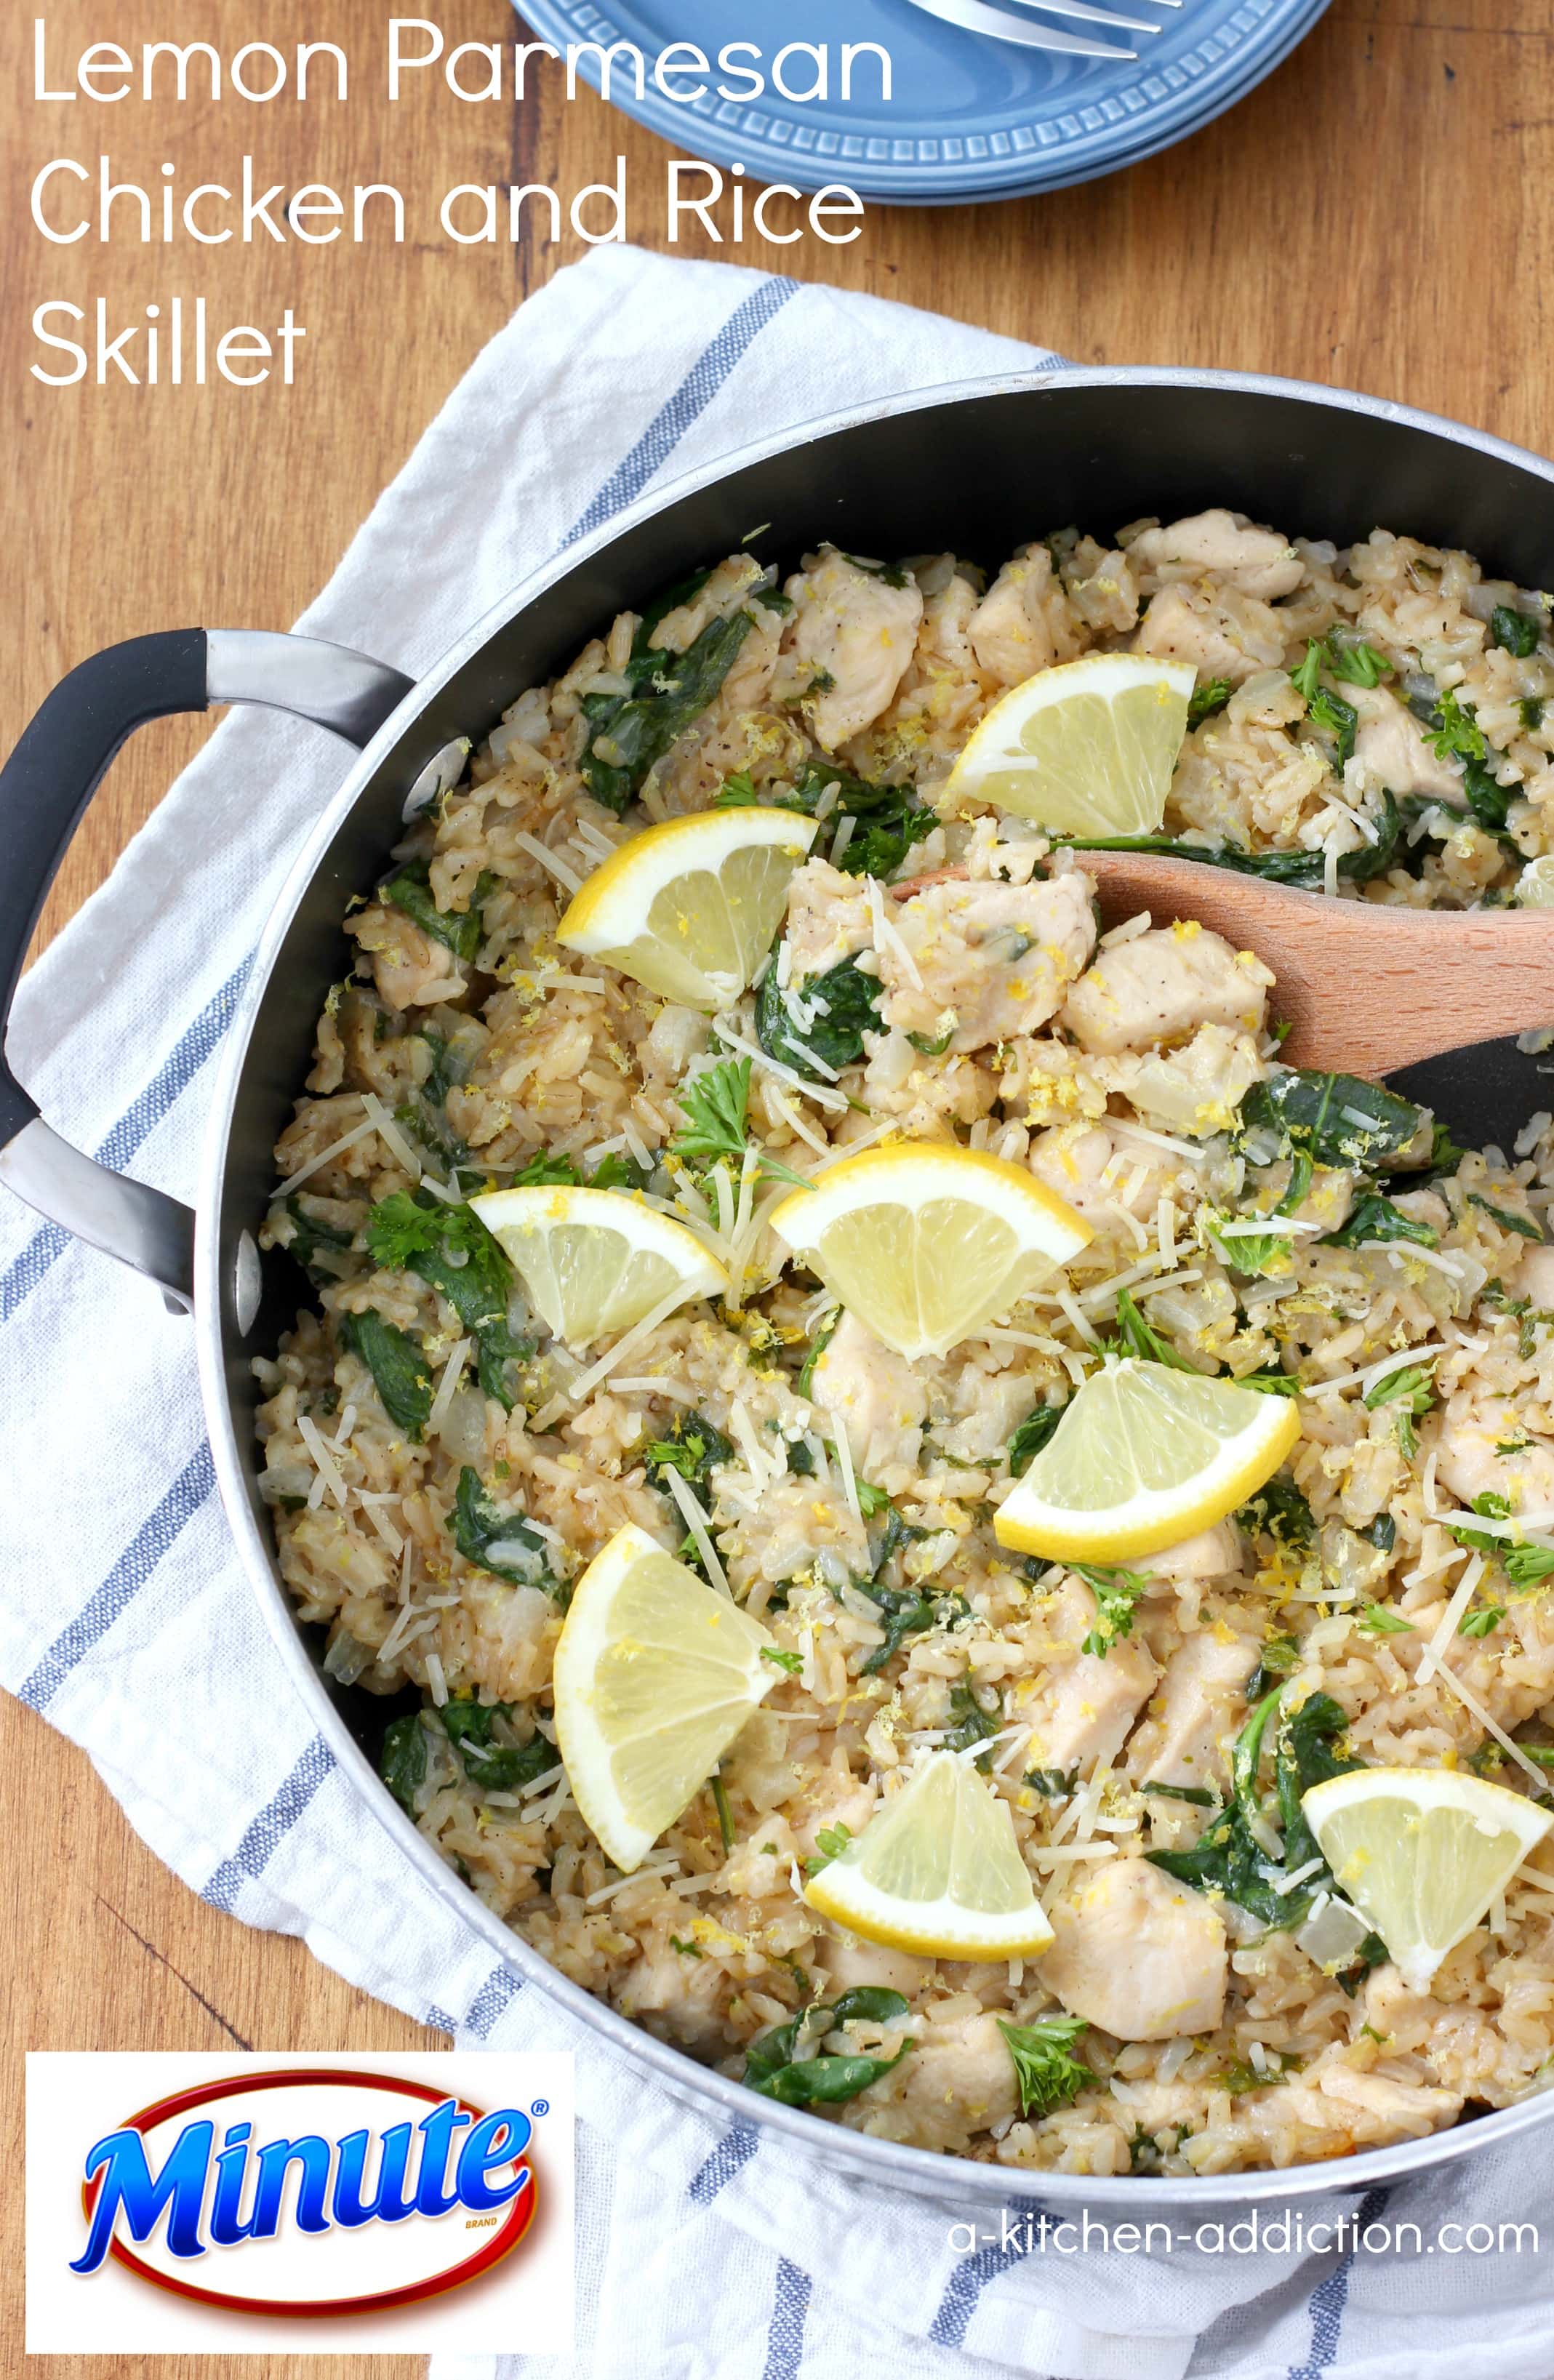 Lemon Parmesan Chicken and Rice Skillet from A Kitchen Addiction